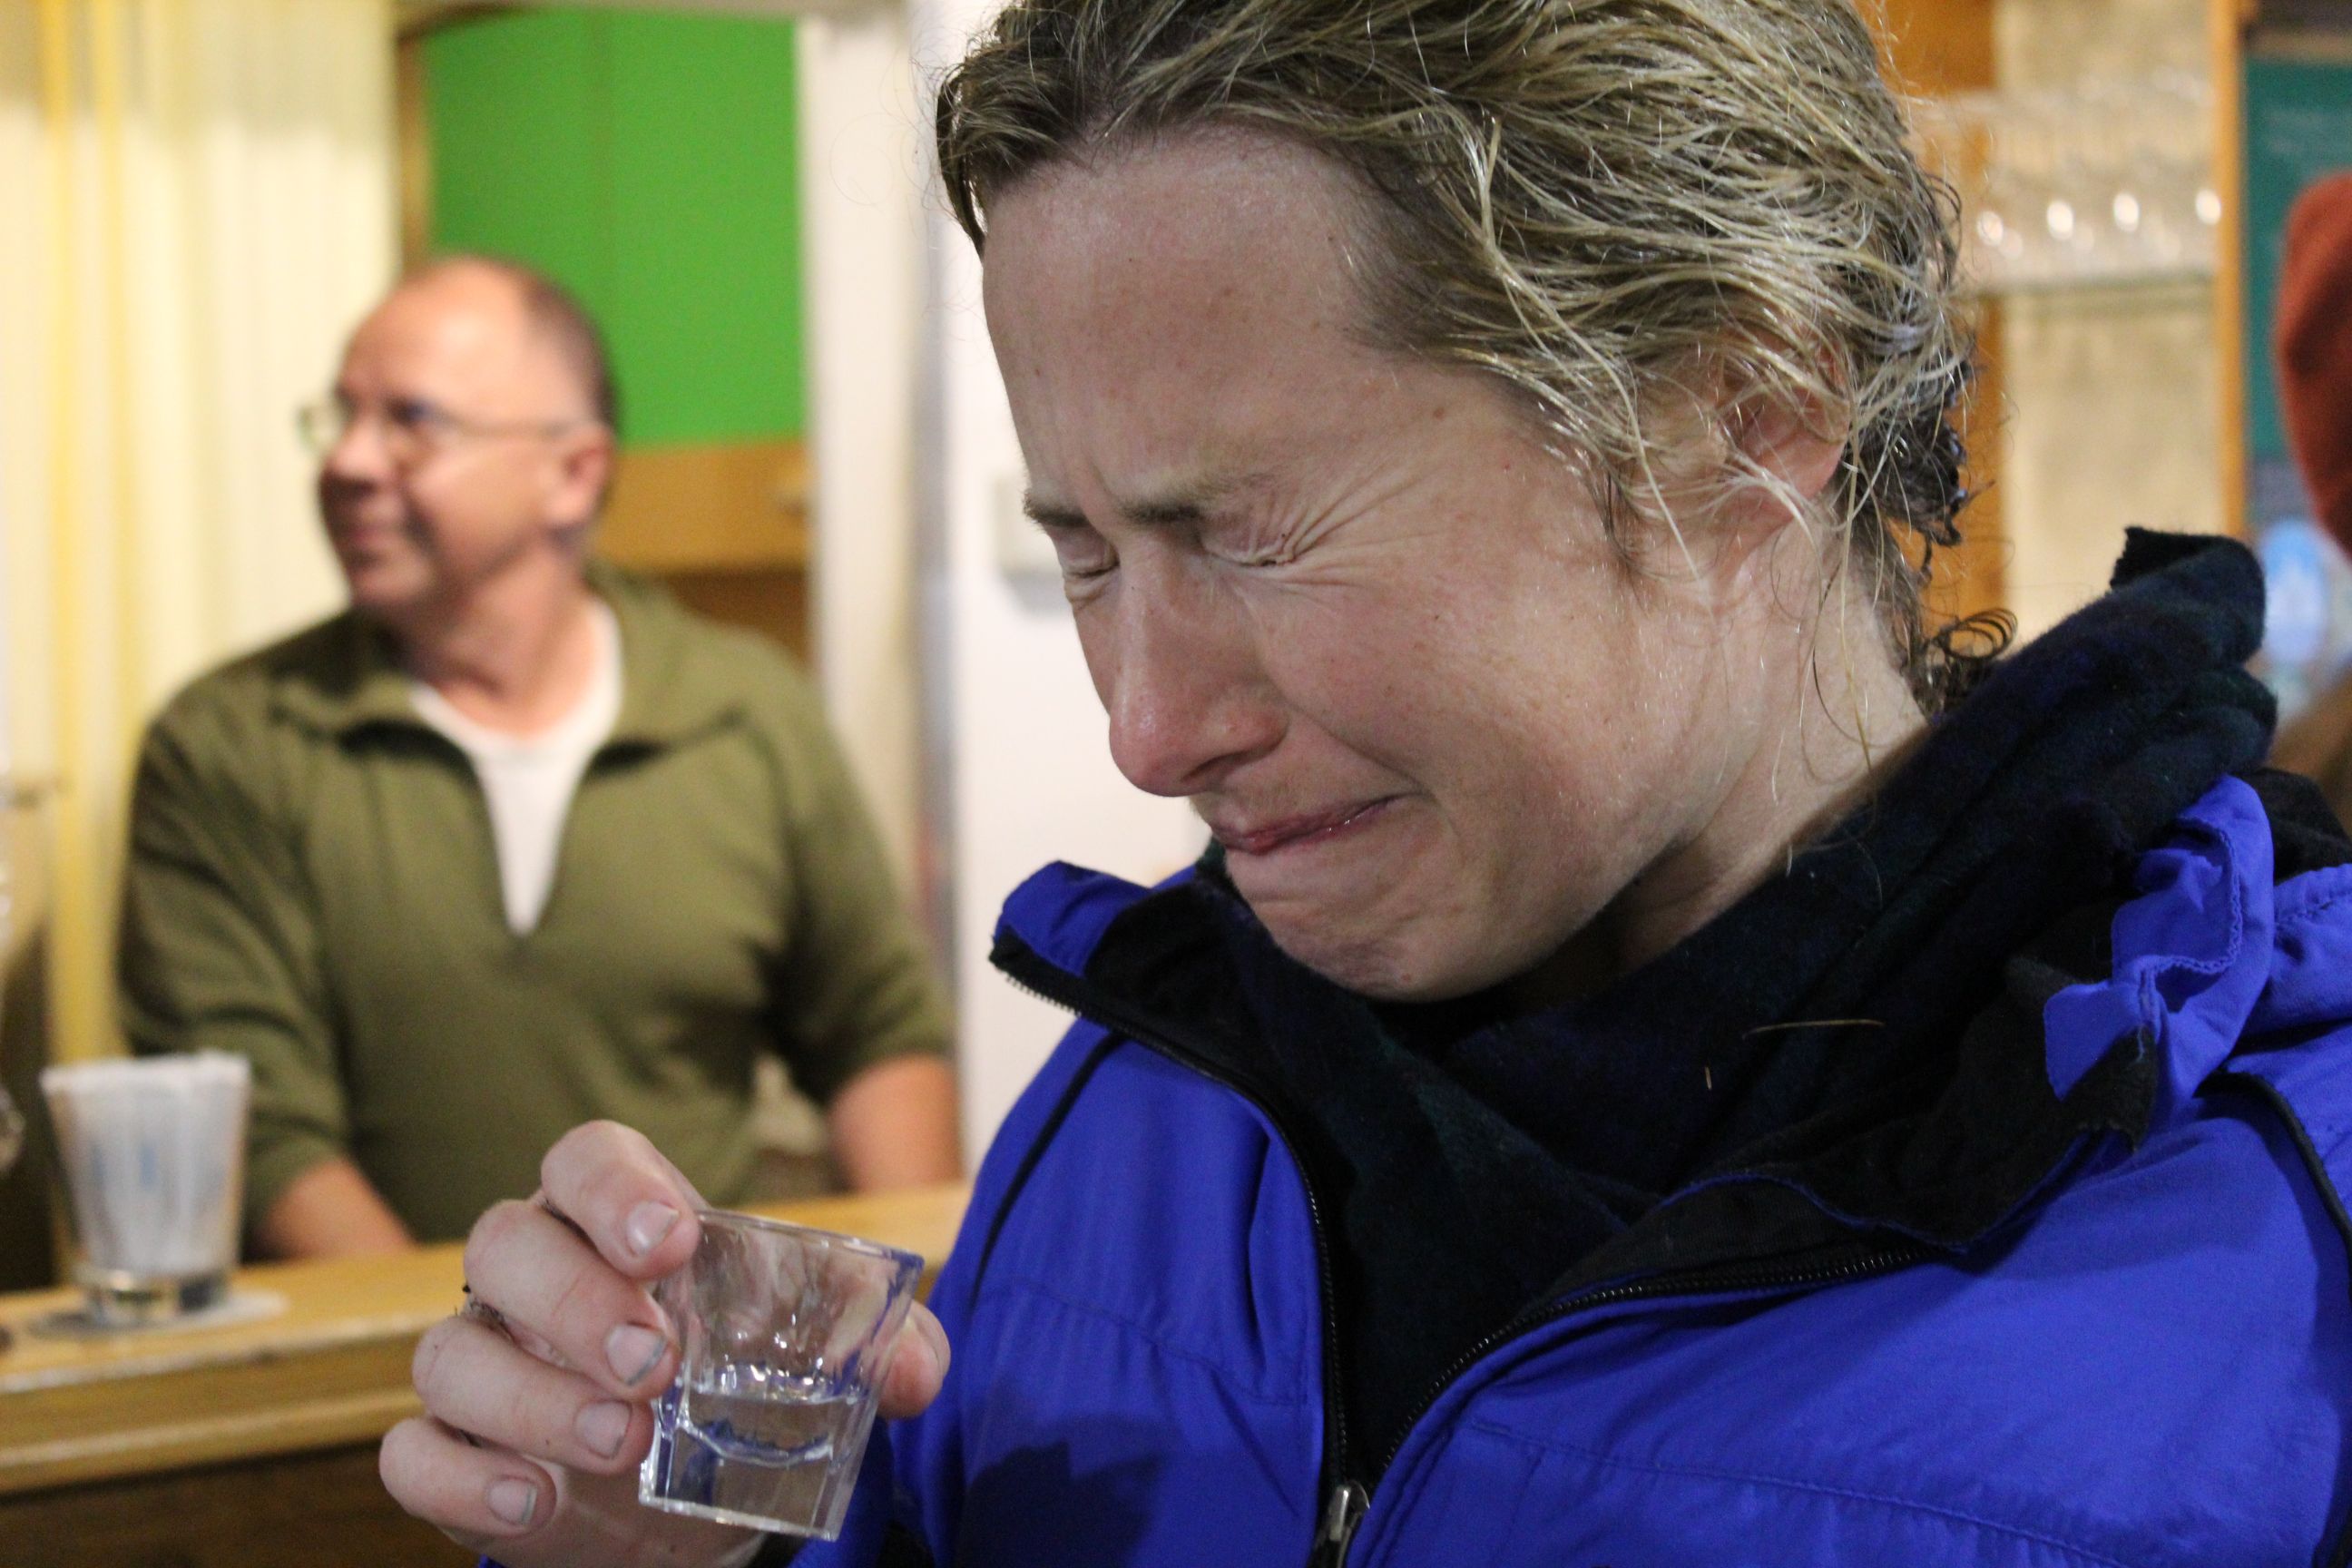 A woman wincing after downing a glass of schnapps.